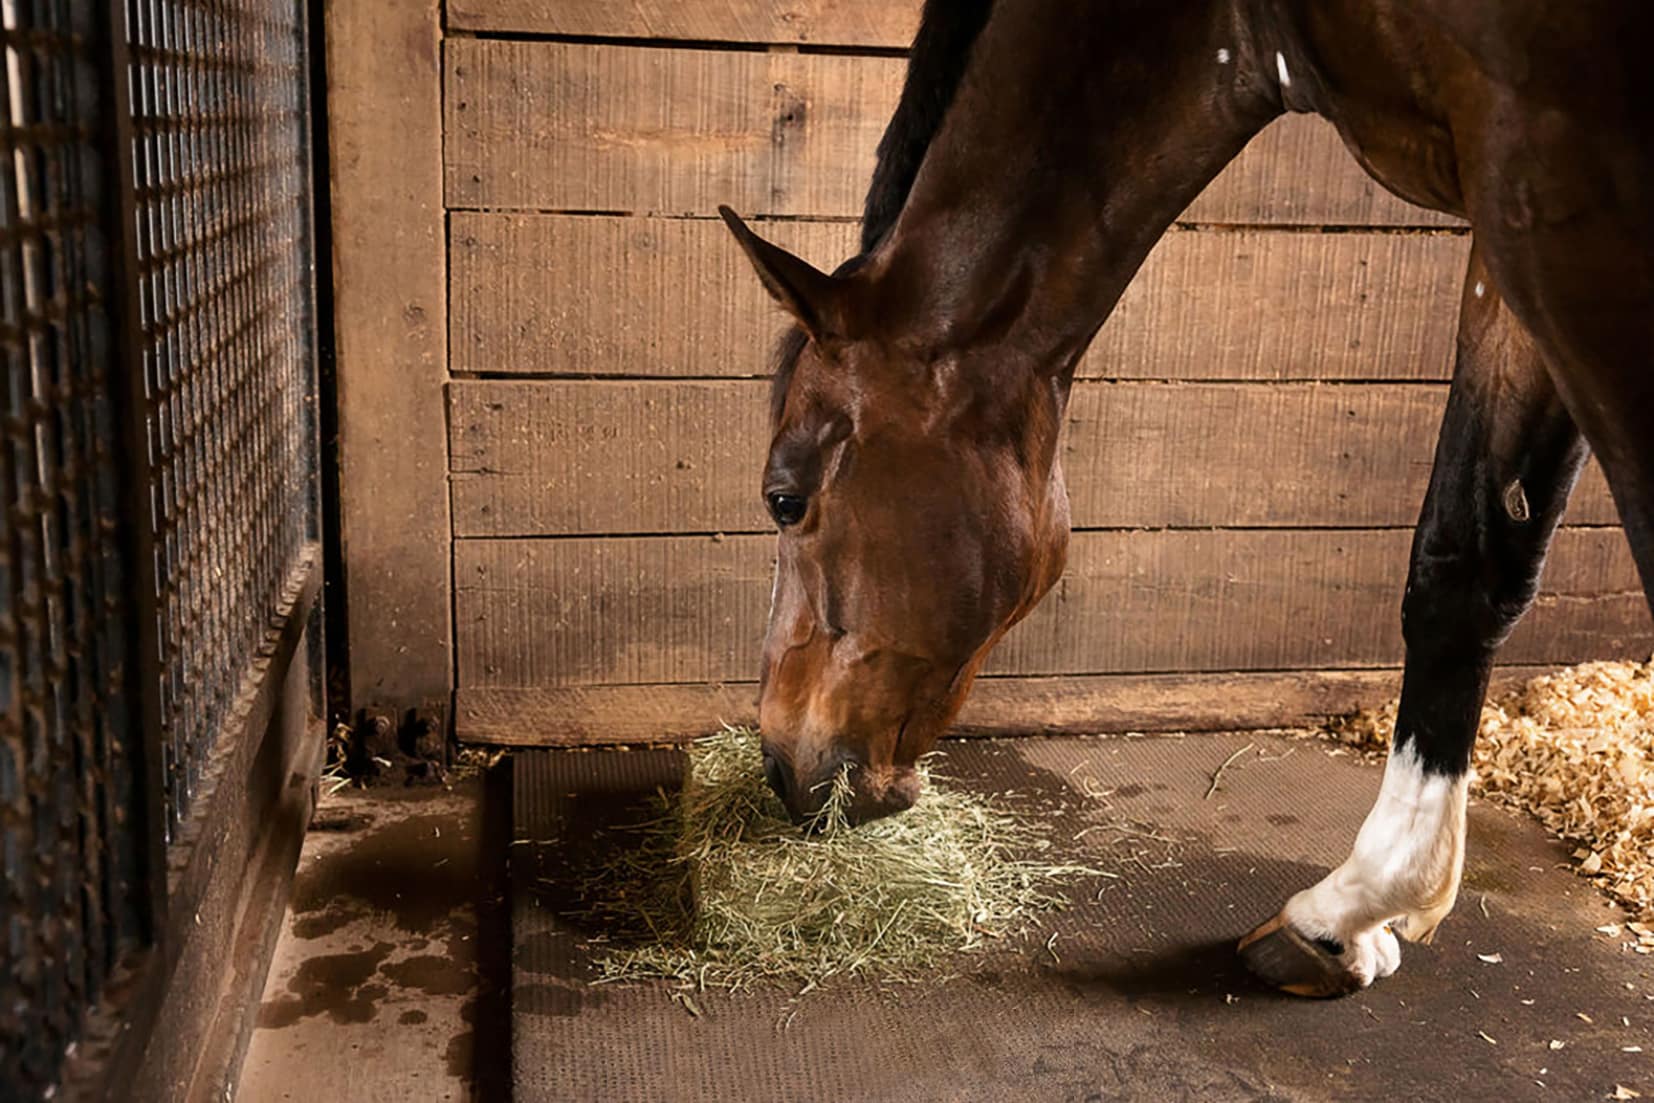 Ensuring your horse has adequate access to forage (hay, pasture, chaff) is the first port of call. (Image: Shelley Paulson)